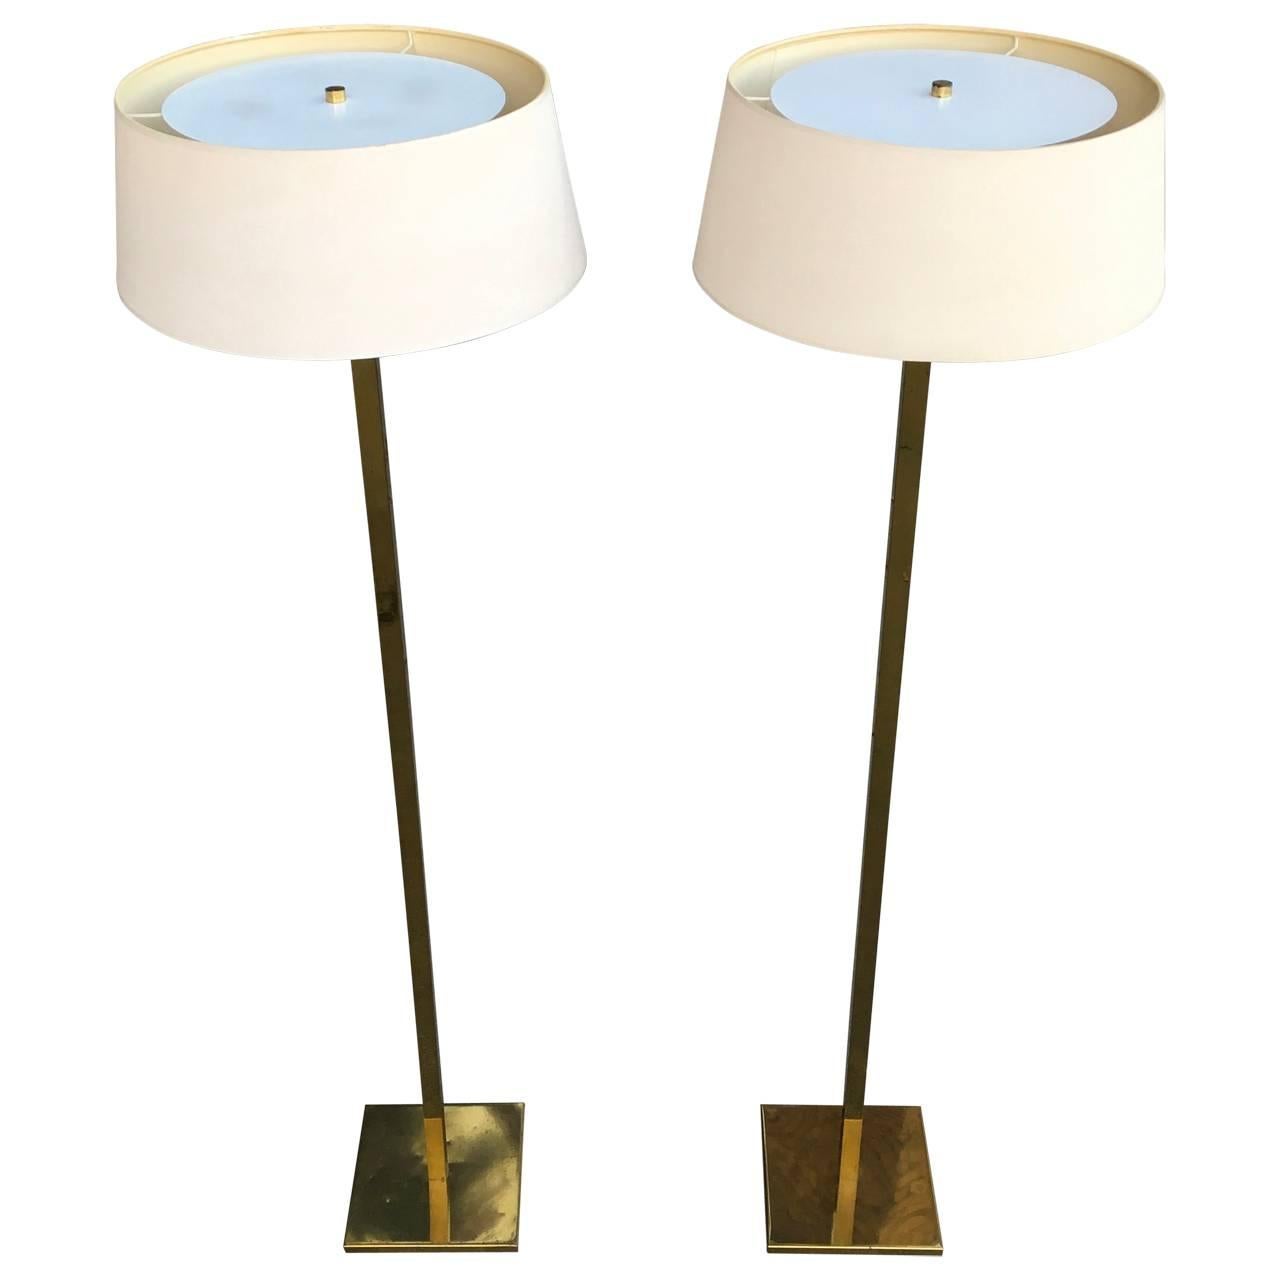 Tall pair of signed Mid-Century brass floor lamps on square base.
The lamps are in the original brass finish and original fuses and hard ware. Can be re-wired to modern code if need be.
Signed Nessen Studio NY, impressed into the socket.
Comes with